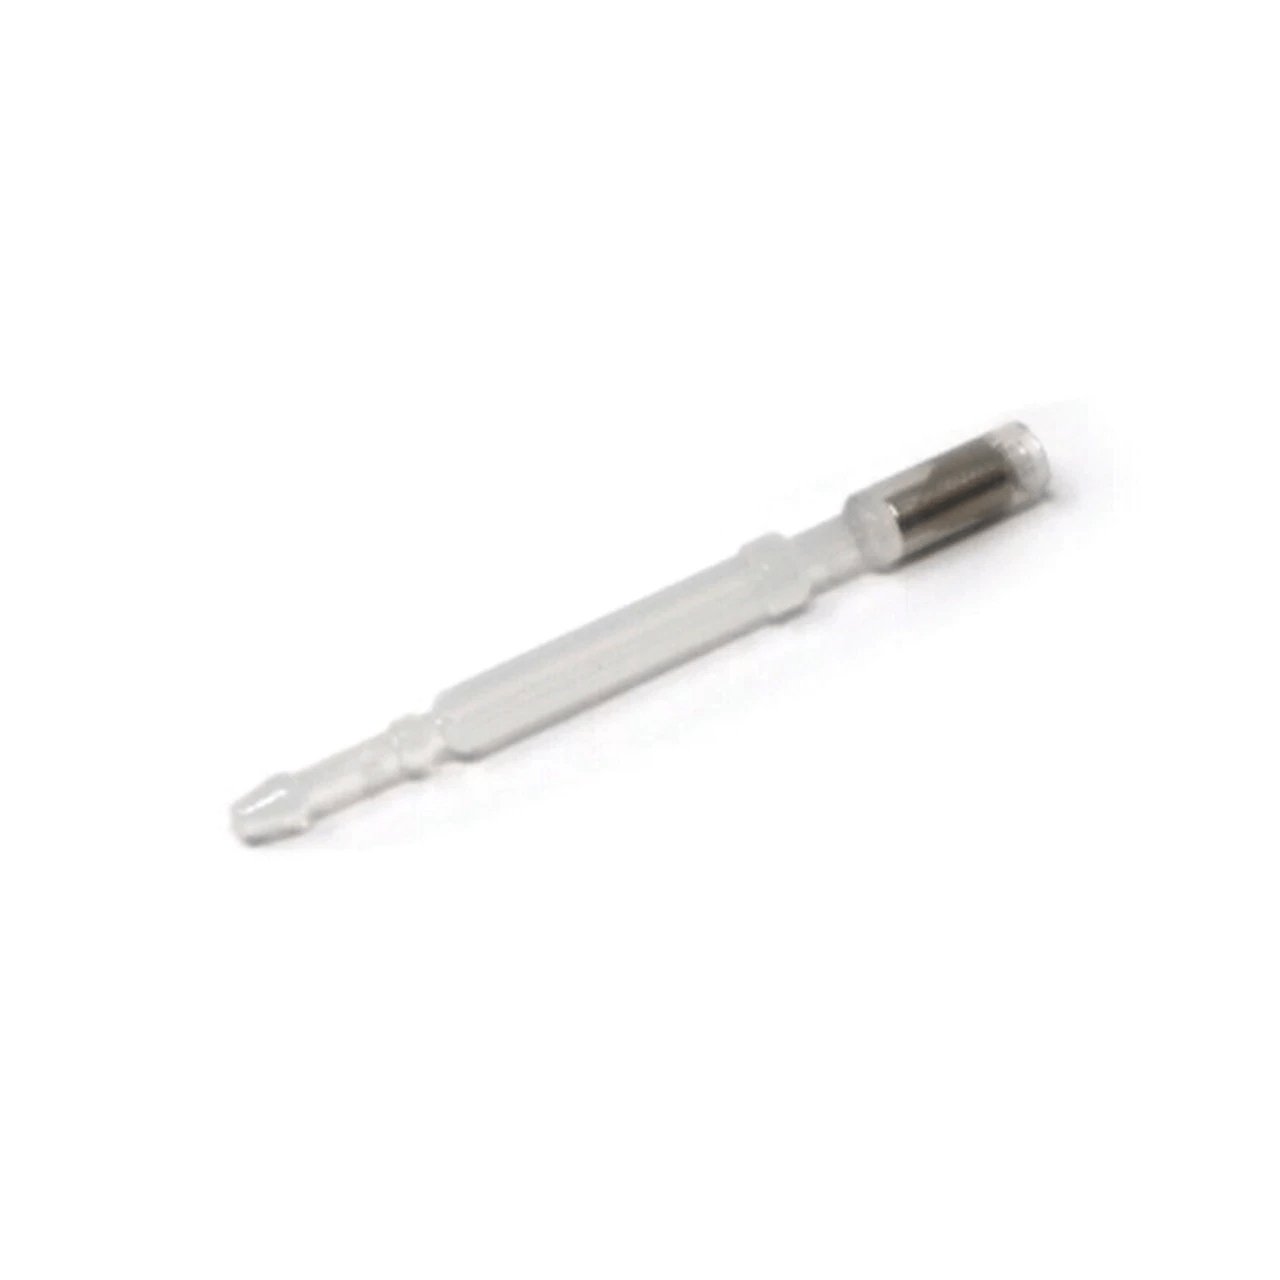 Replacement Needle, Nib, Tip, Pin for BL-Touch / BLTouch